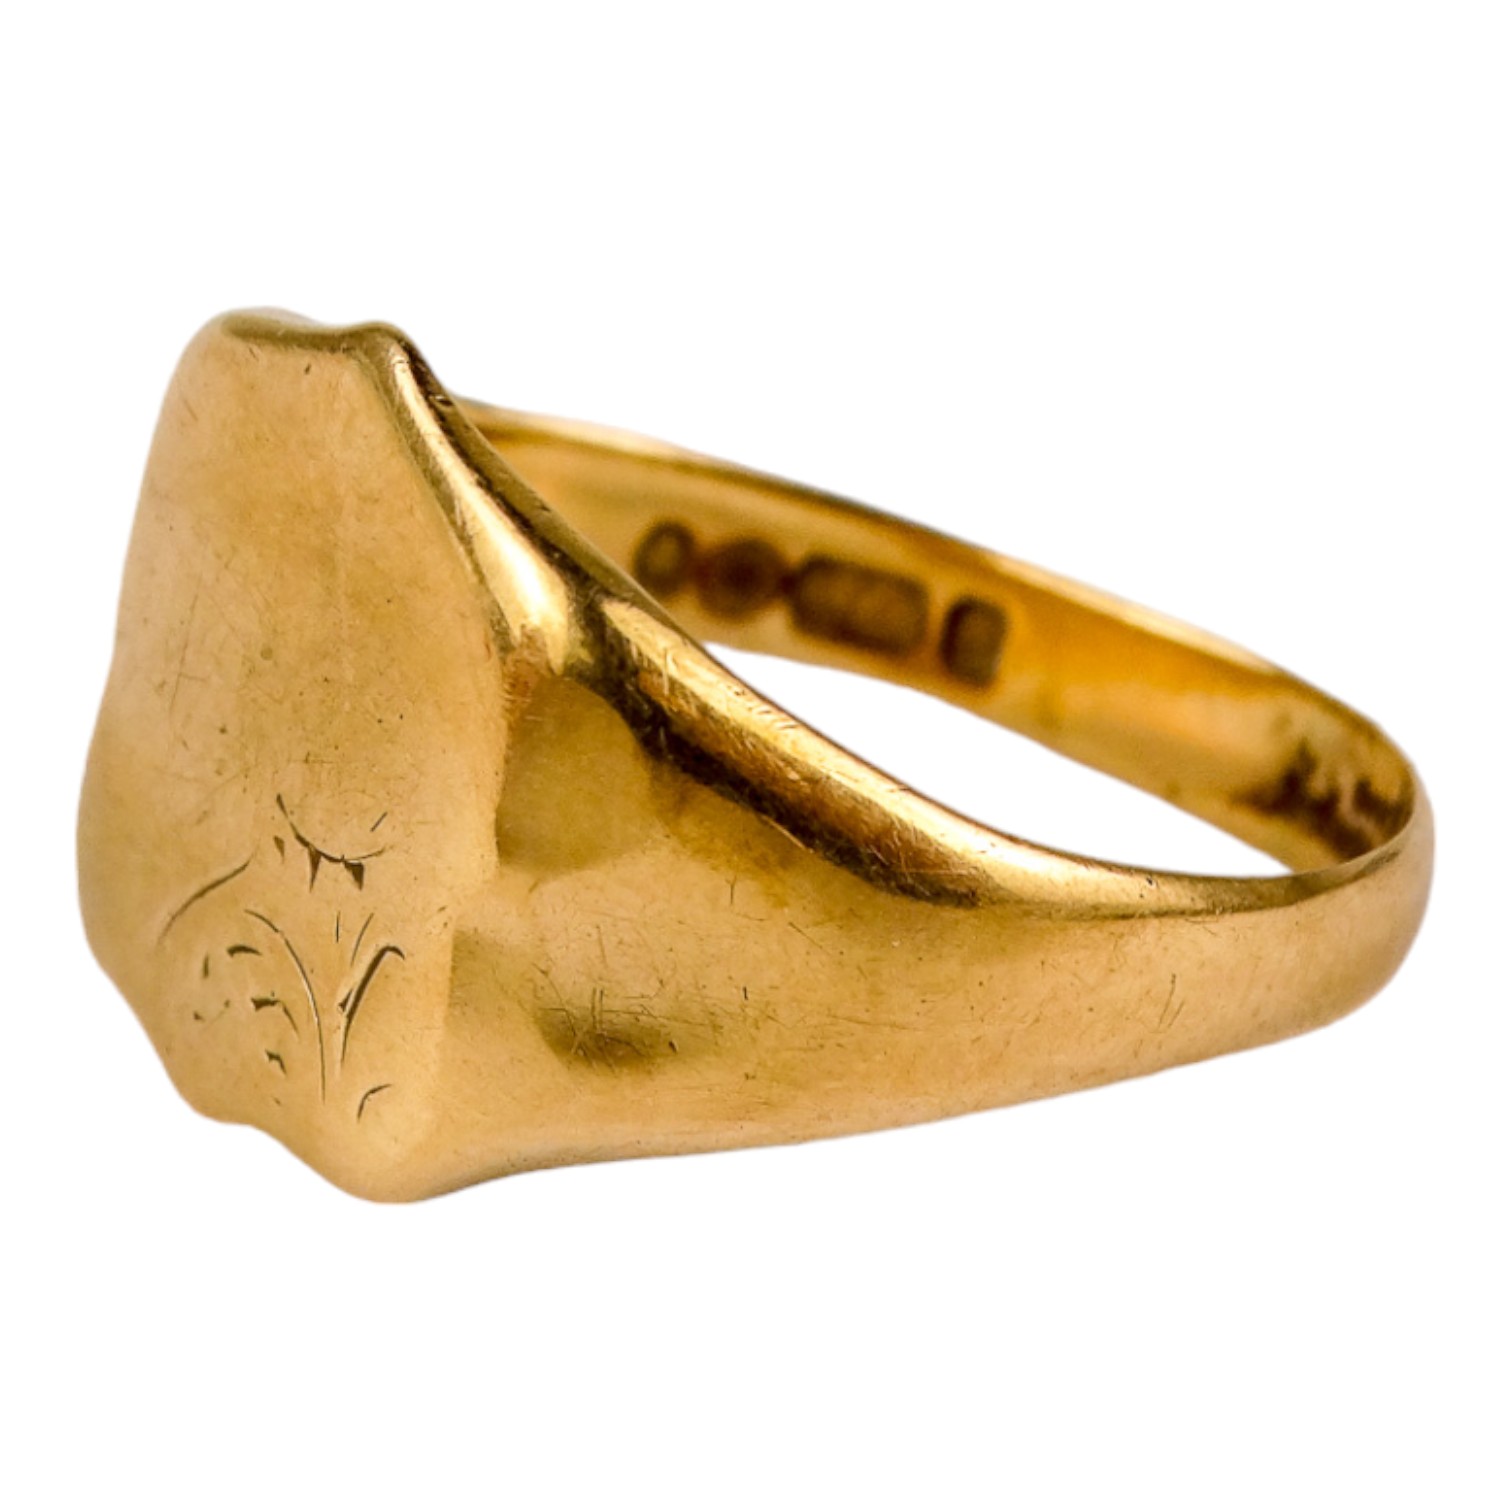 A 9ct yellow gold signet ring - size Q/R, weight 4.1g. - Image 2 of 3